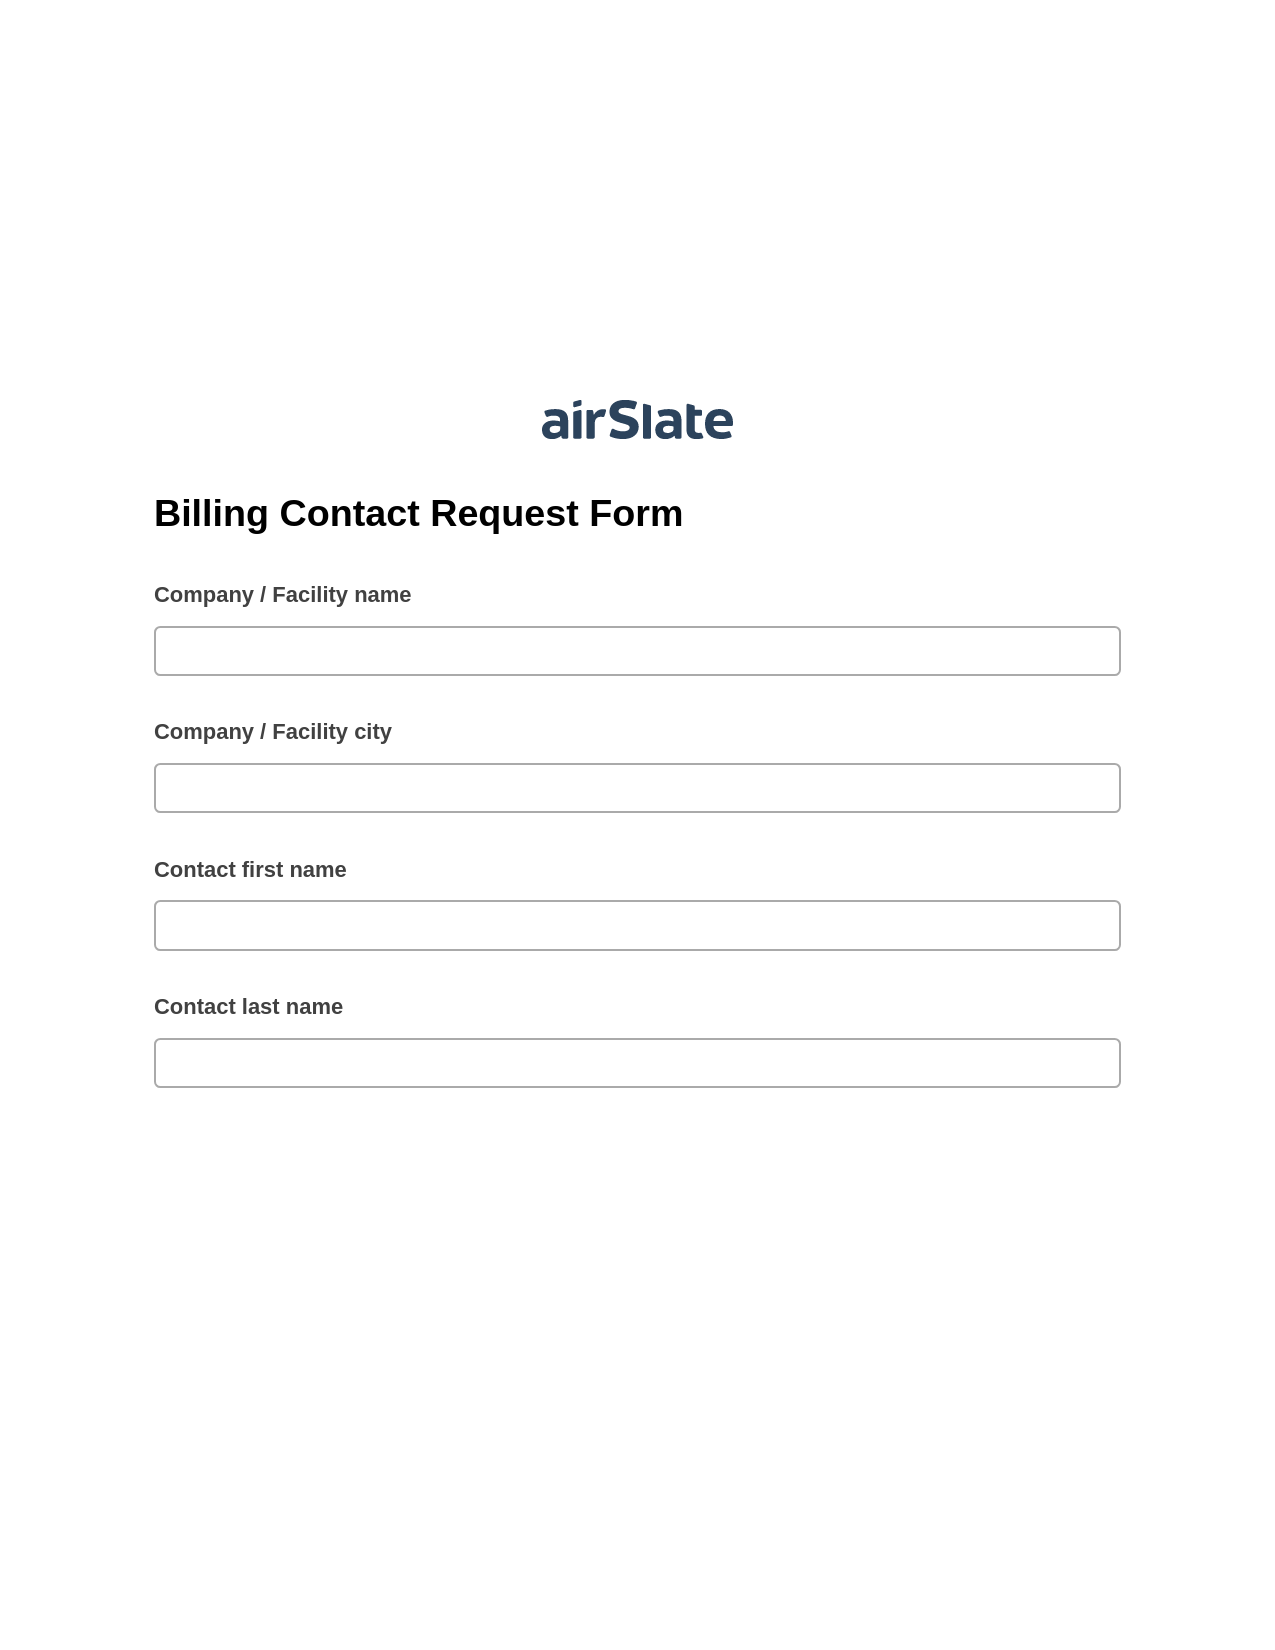 Billing Contact Request Form Pre-fill from Google Sheets Bot, Reminder Bot, Export to Smartsheet